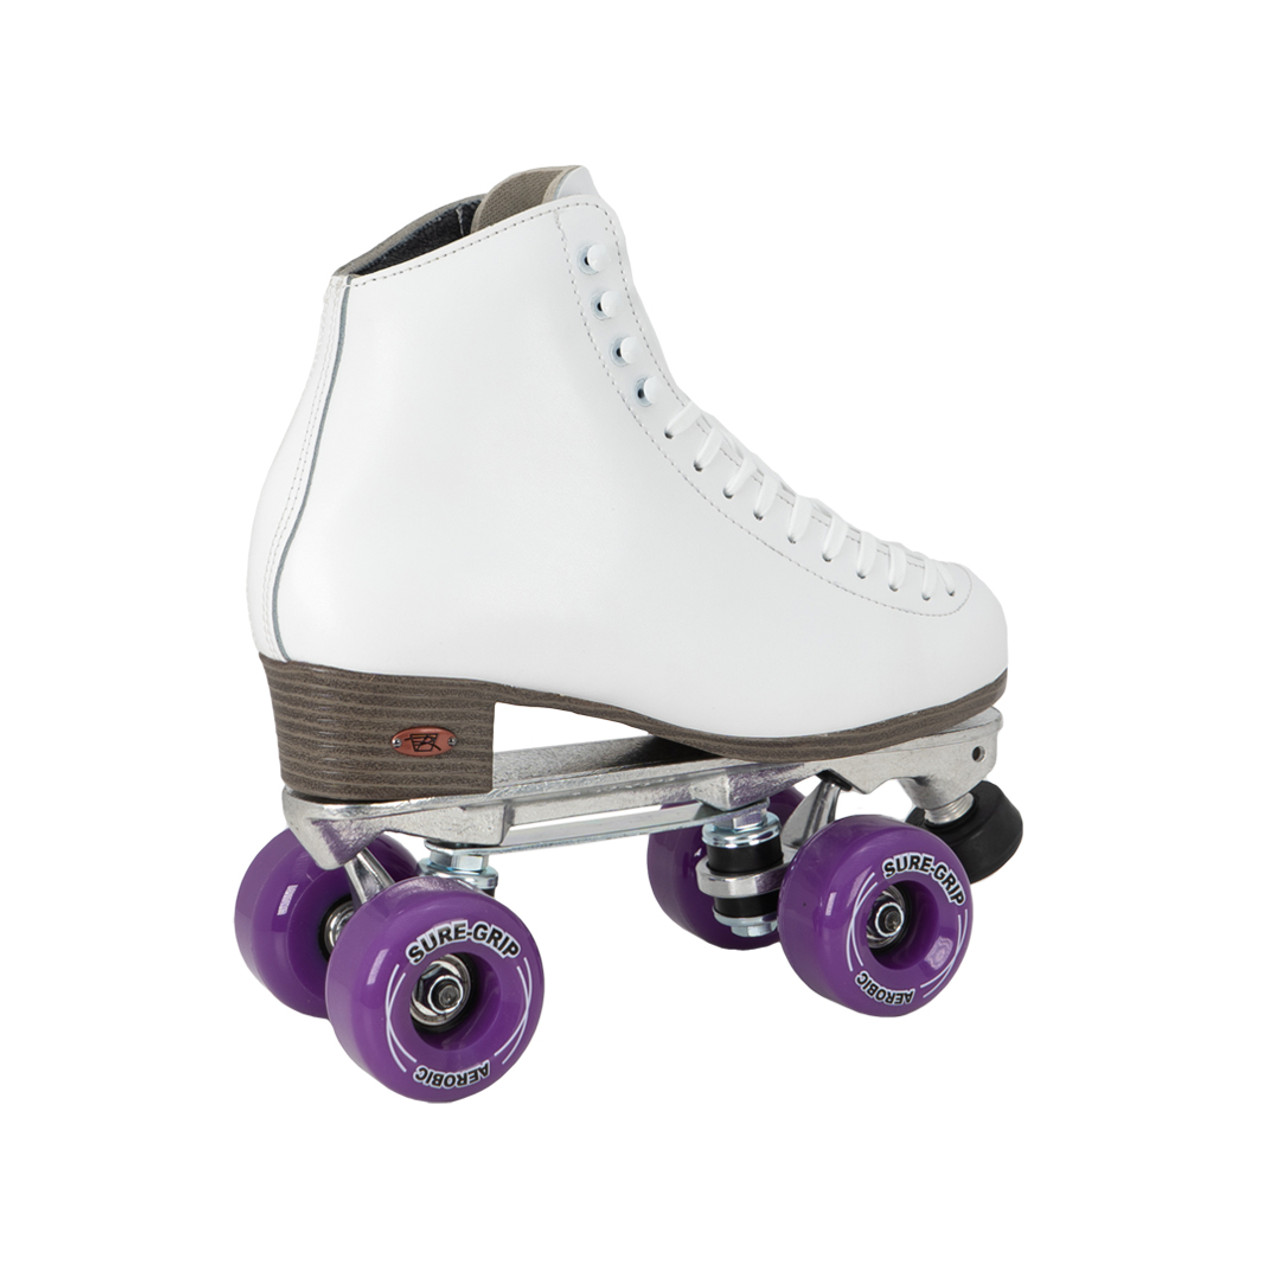 Riedell 120 Roller Skates  Competition Outdoor Roller Skates